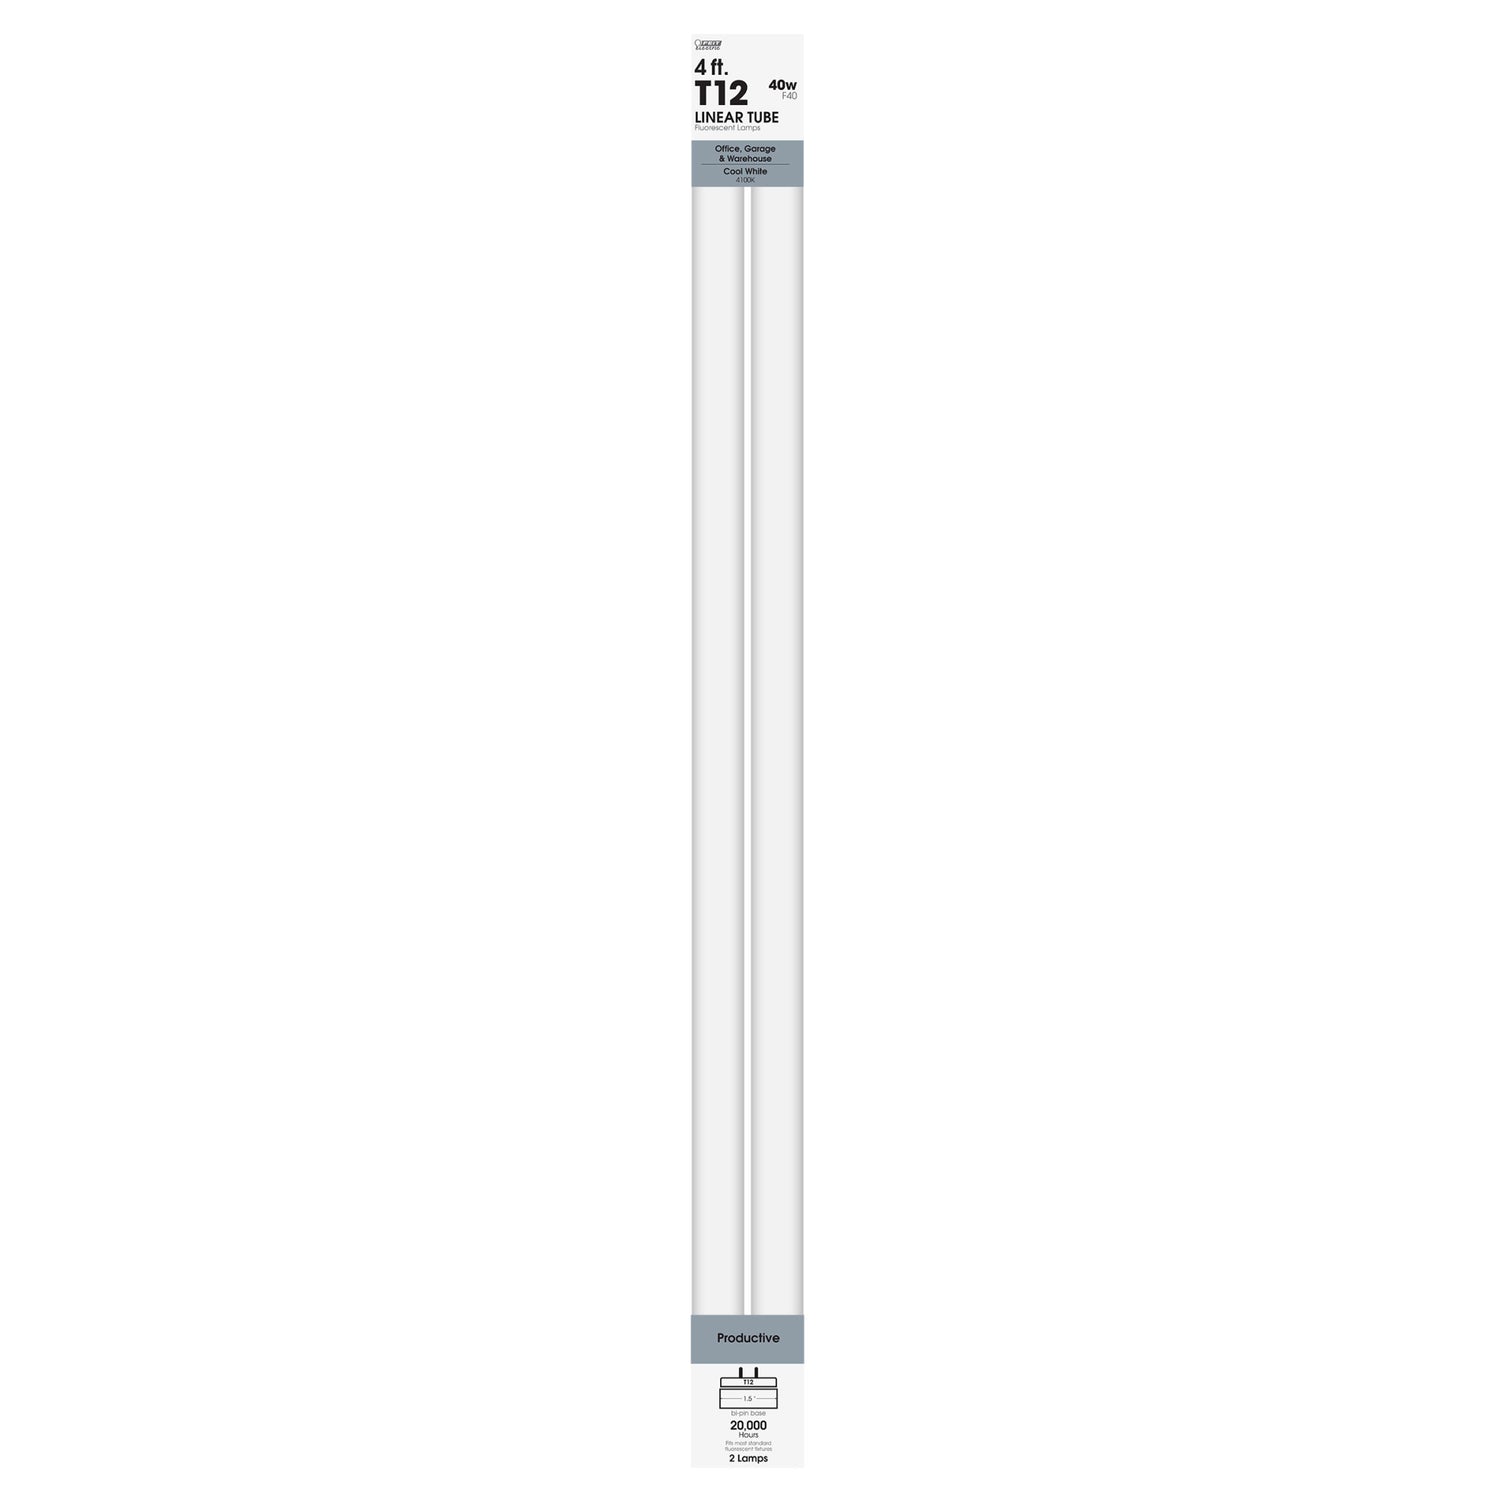 4 ft. 40W Cool White (4100K) G13 Base (T12 Replacement) Fluorescent Linear Light Tube (2-Pack)